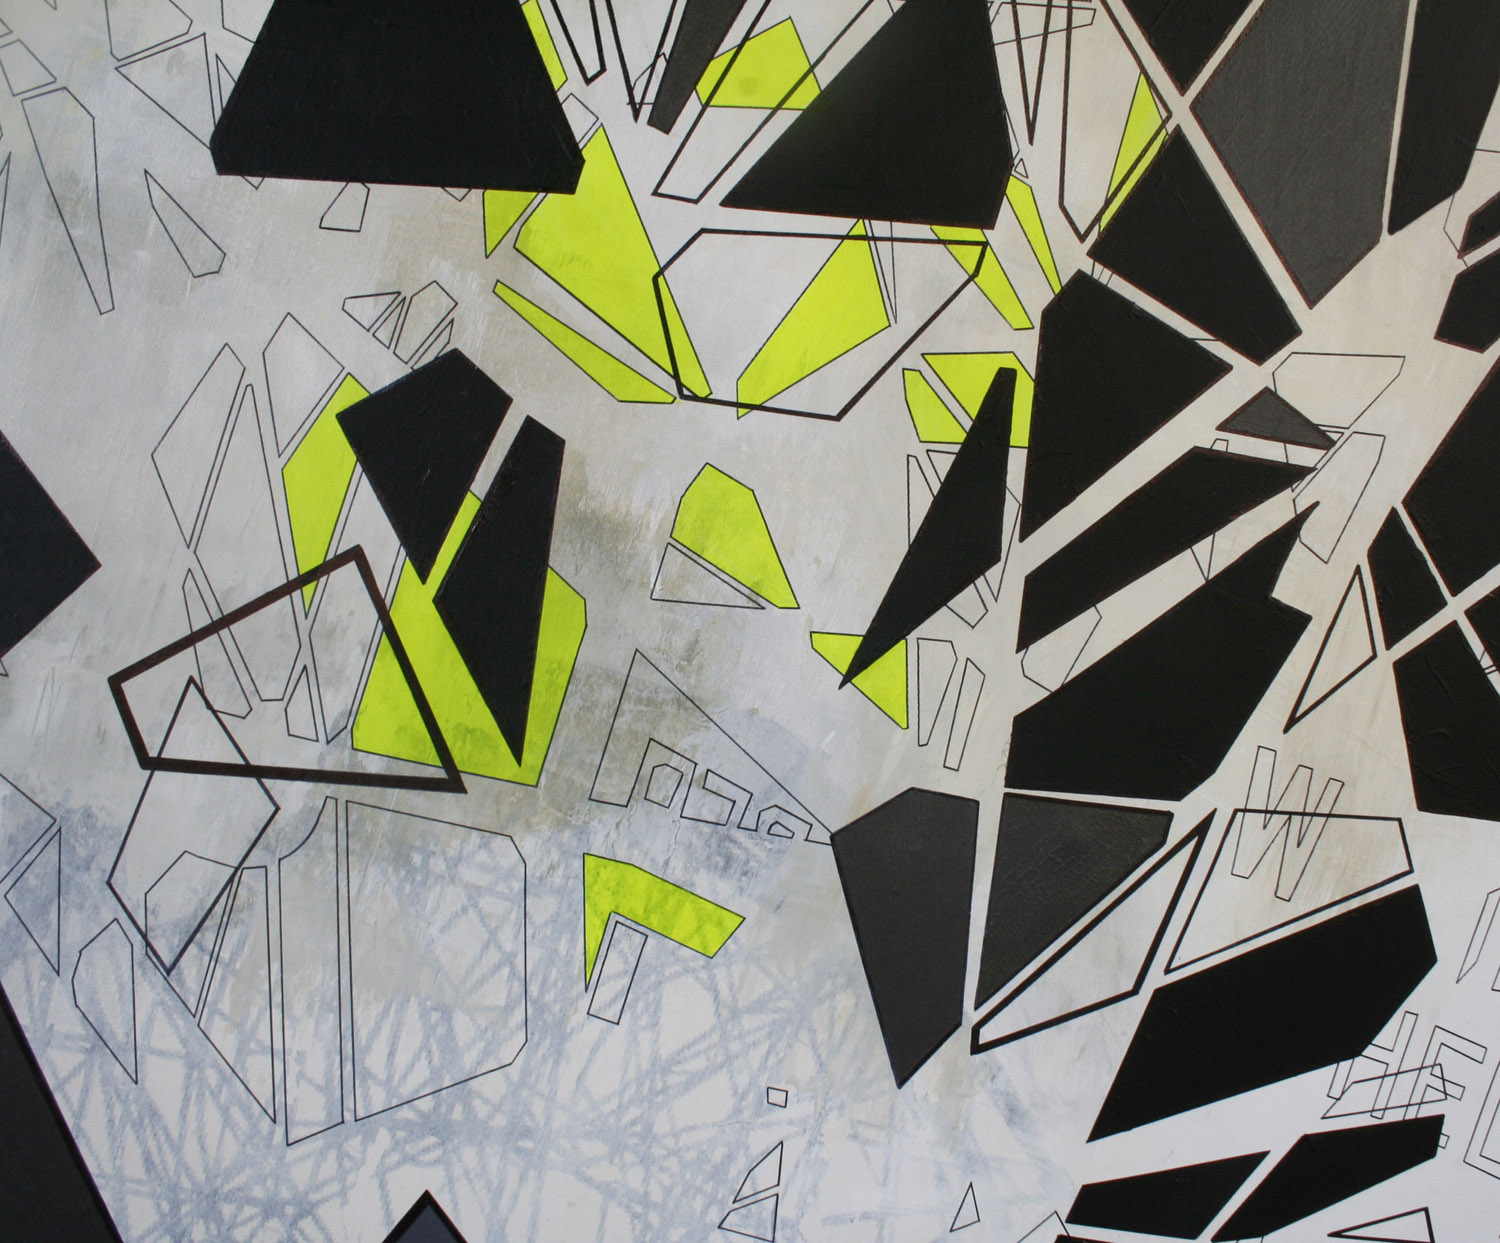 paintings, collages, abstract, geometric, graphical, pop, architecture, movement, patterns, science, black, grey, white, yellow, acrylic, cotton-canvas, pencils, photographs, abstract-forms, architectural, buildings, contemporary-art, danish, decorative, design, farm, interior, interior-design, modern, modern-art, nordic, scandinavien, Buy original high quality art. Paintings, drawings, limited edition prints & posters by talented artists.